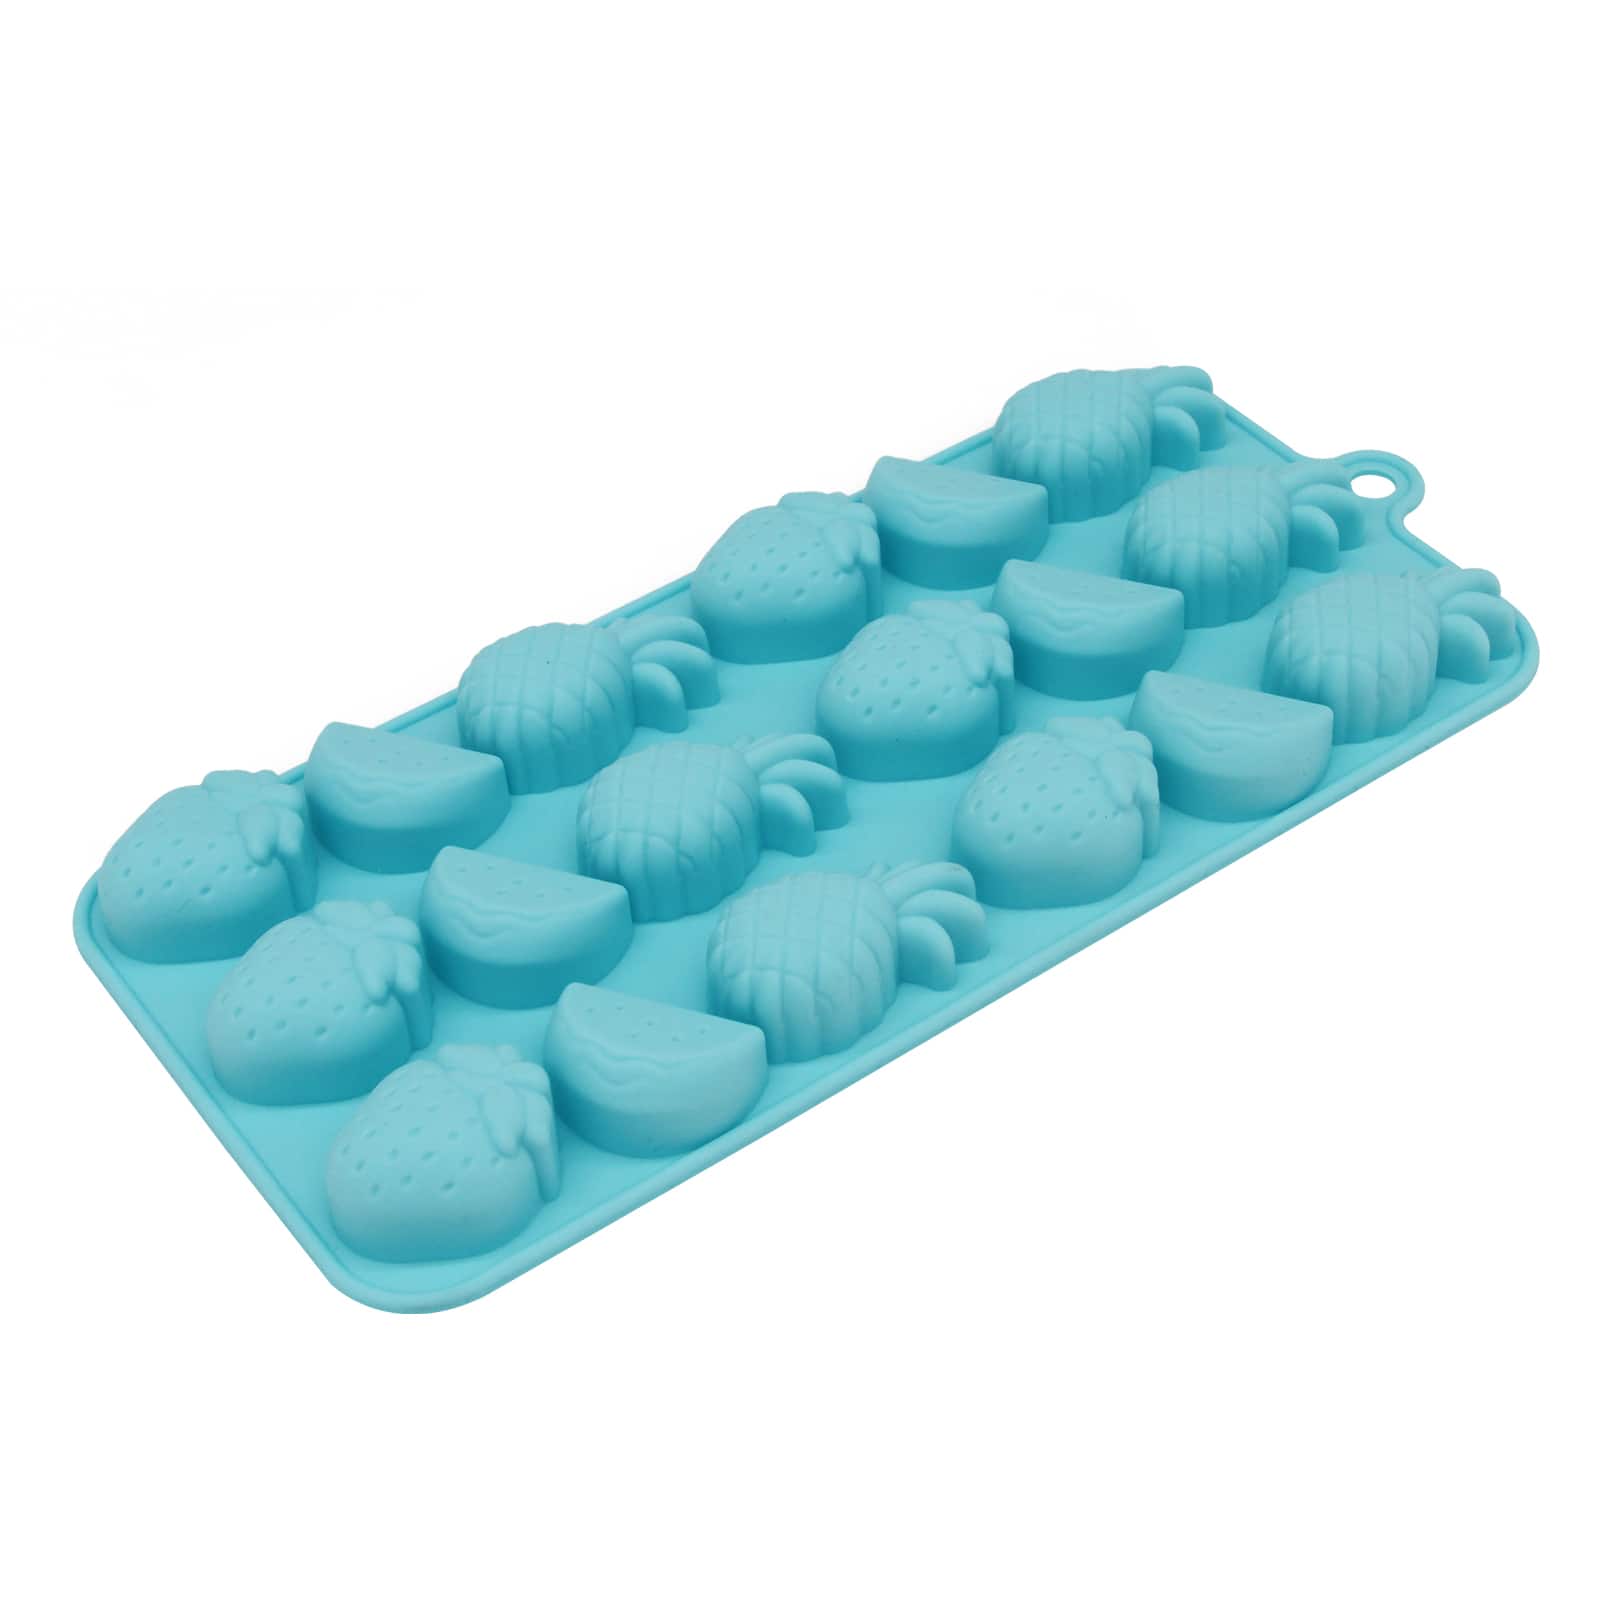 Oavqhlg3b Fruit Shaped Silicone Mold Chocolate Candy Mold,Strawberries/Pineapples/Apples/Grapes Flexible Baking Molds for Ice Cube,Jelly,Biscuits